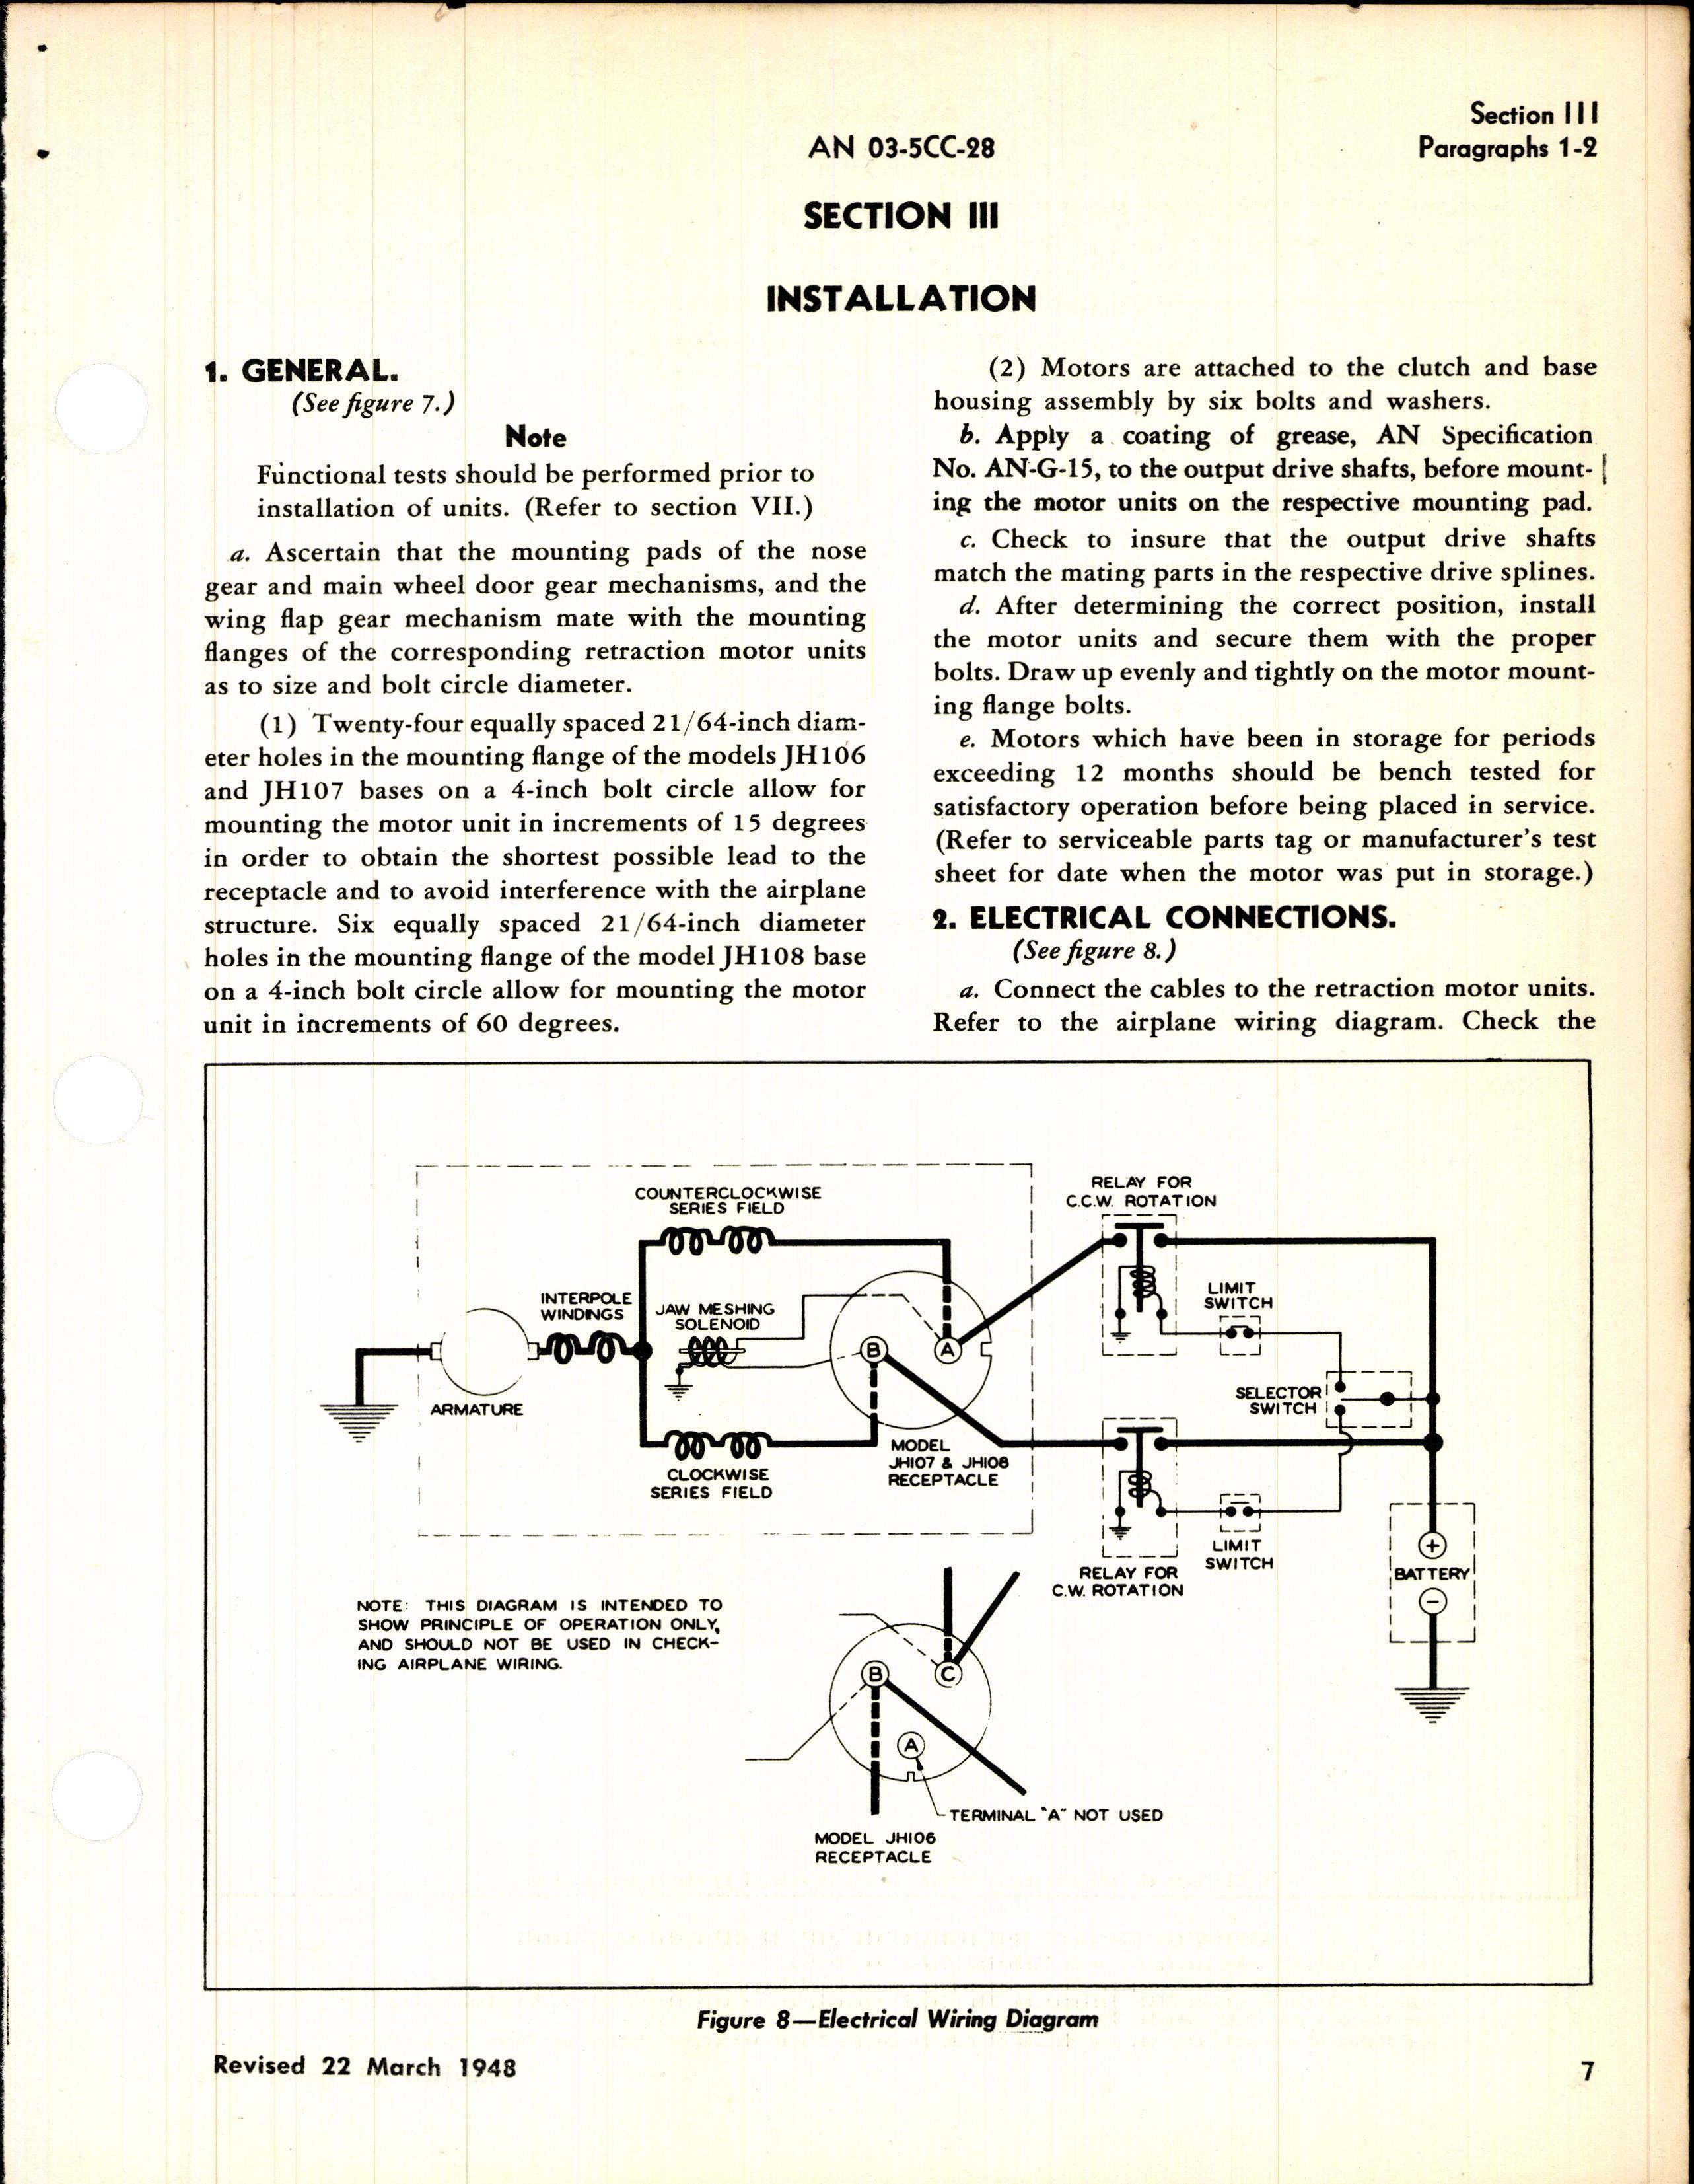 Sample page 3 from AirCorps Library document: Operation, Service, & Overhaul Instructions with Parts Catalog for Jack & Heintz Retracting Motors